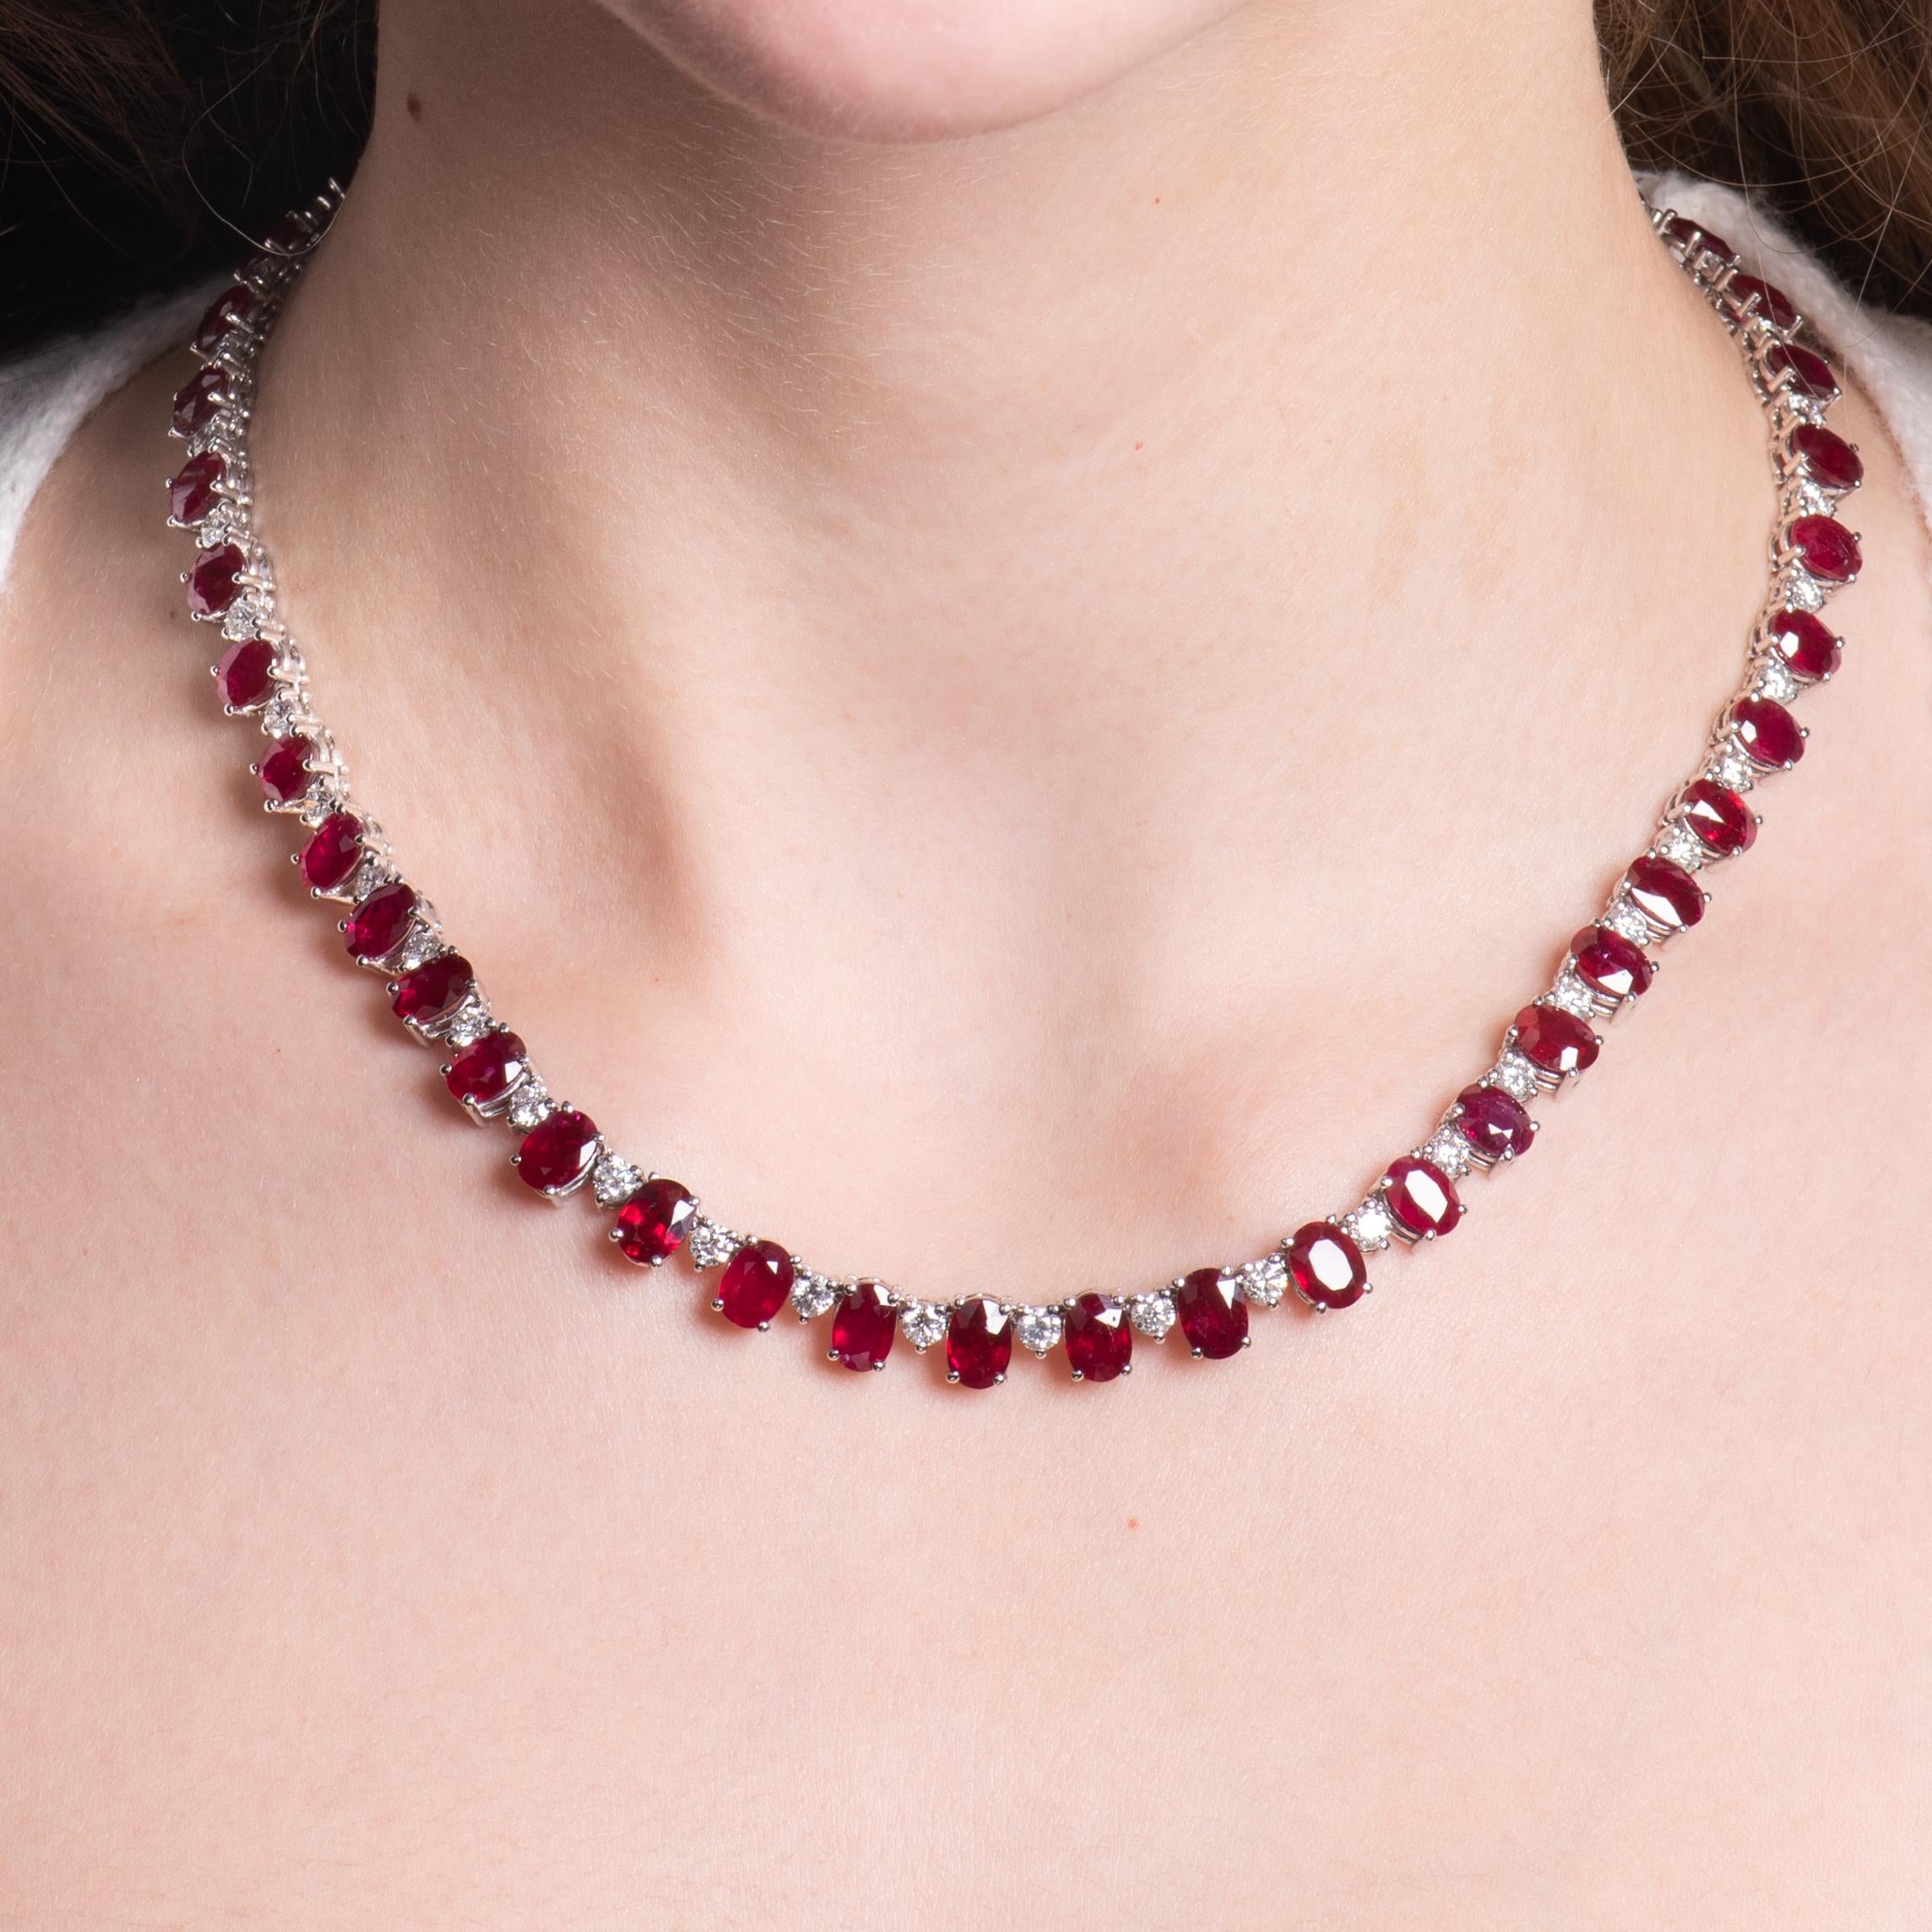 This exquisite necklace features 44.49ct total weight in oval rubies that go around the full 18 inches of the necklace, bordered by 6.90ct total weight in round diamonds. The rubies are lively, of medium saturation, and matched beautifully. The